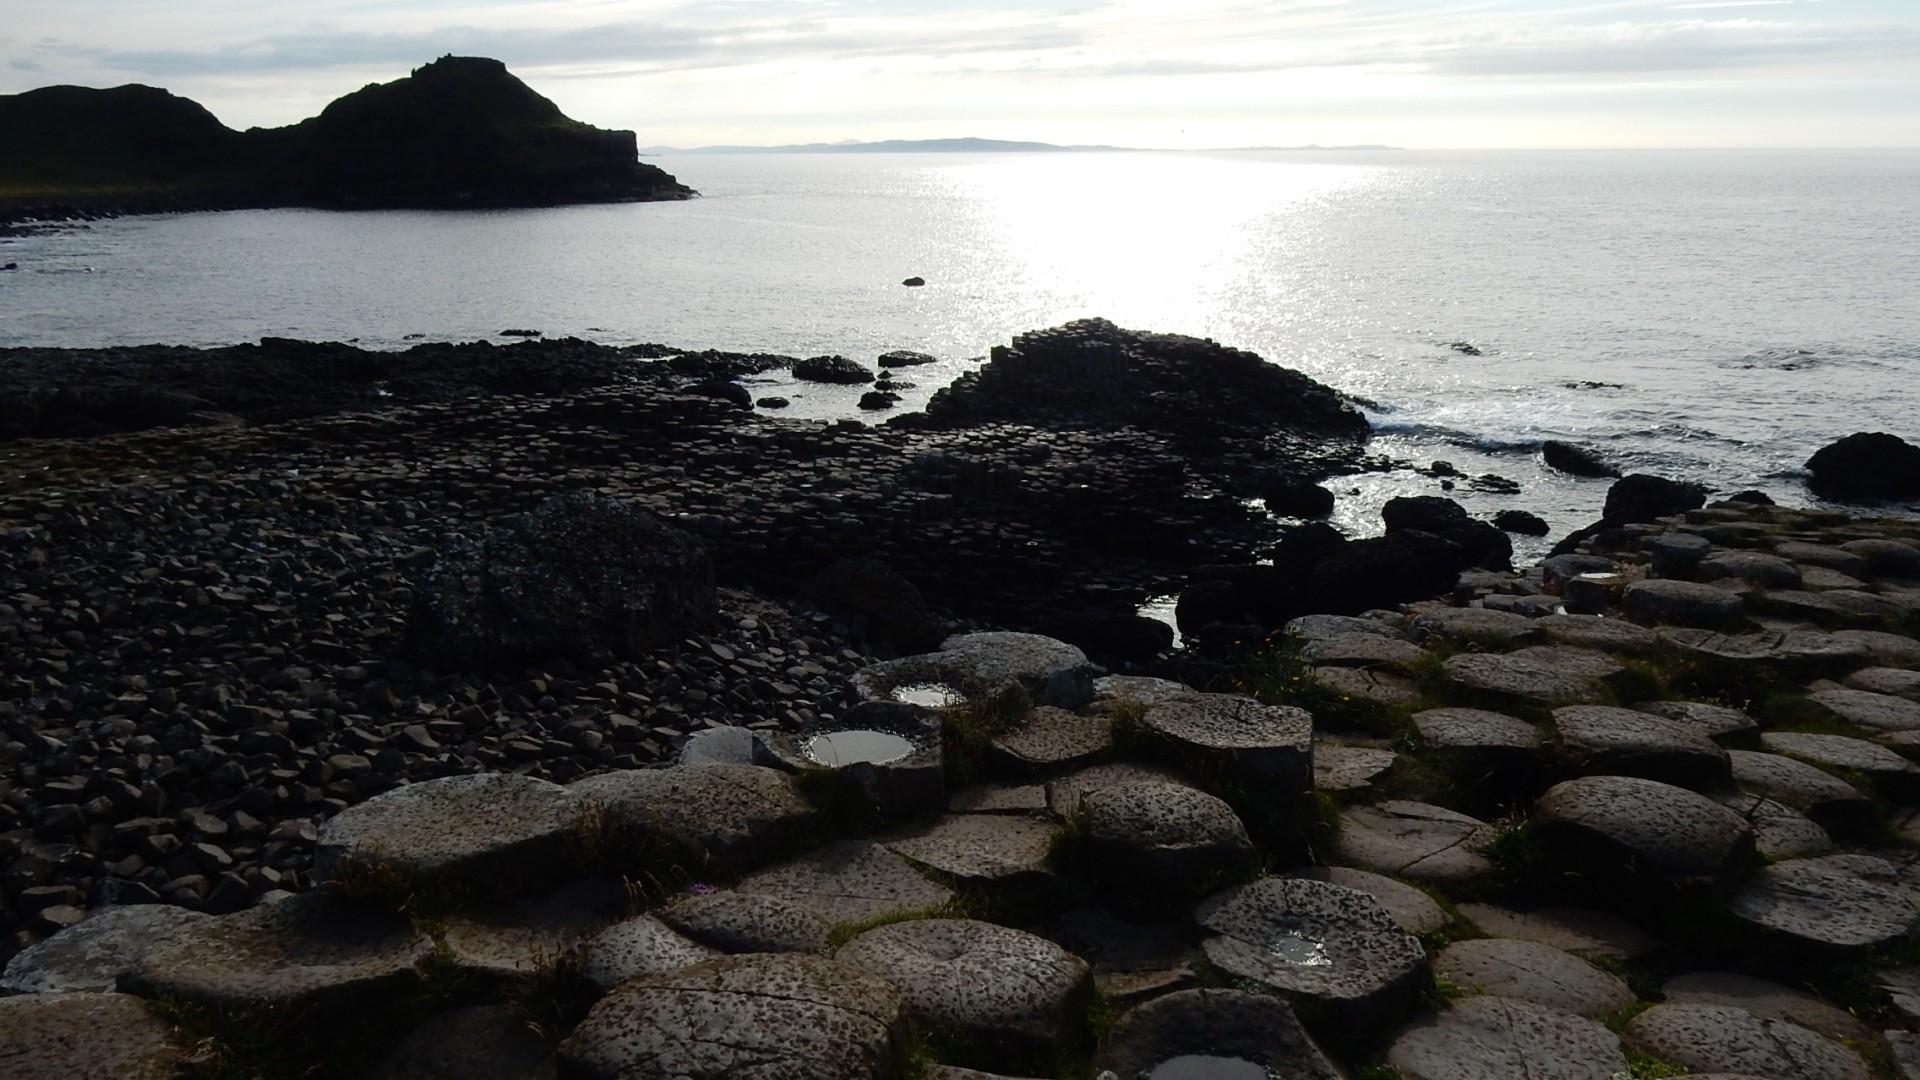 An idyllic view of the Giant’s Causeway, June 2020